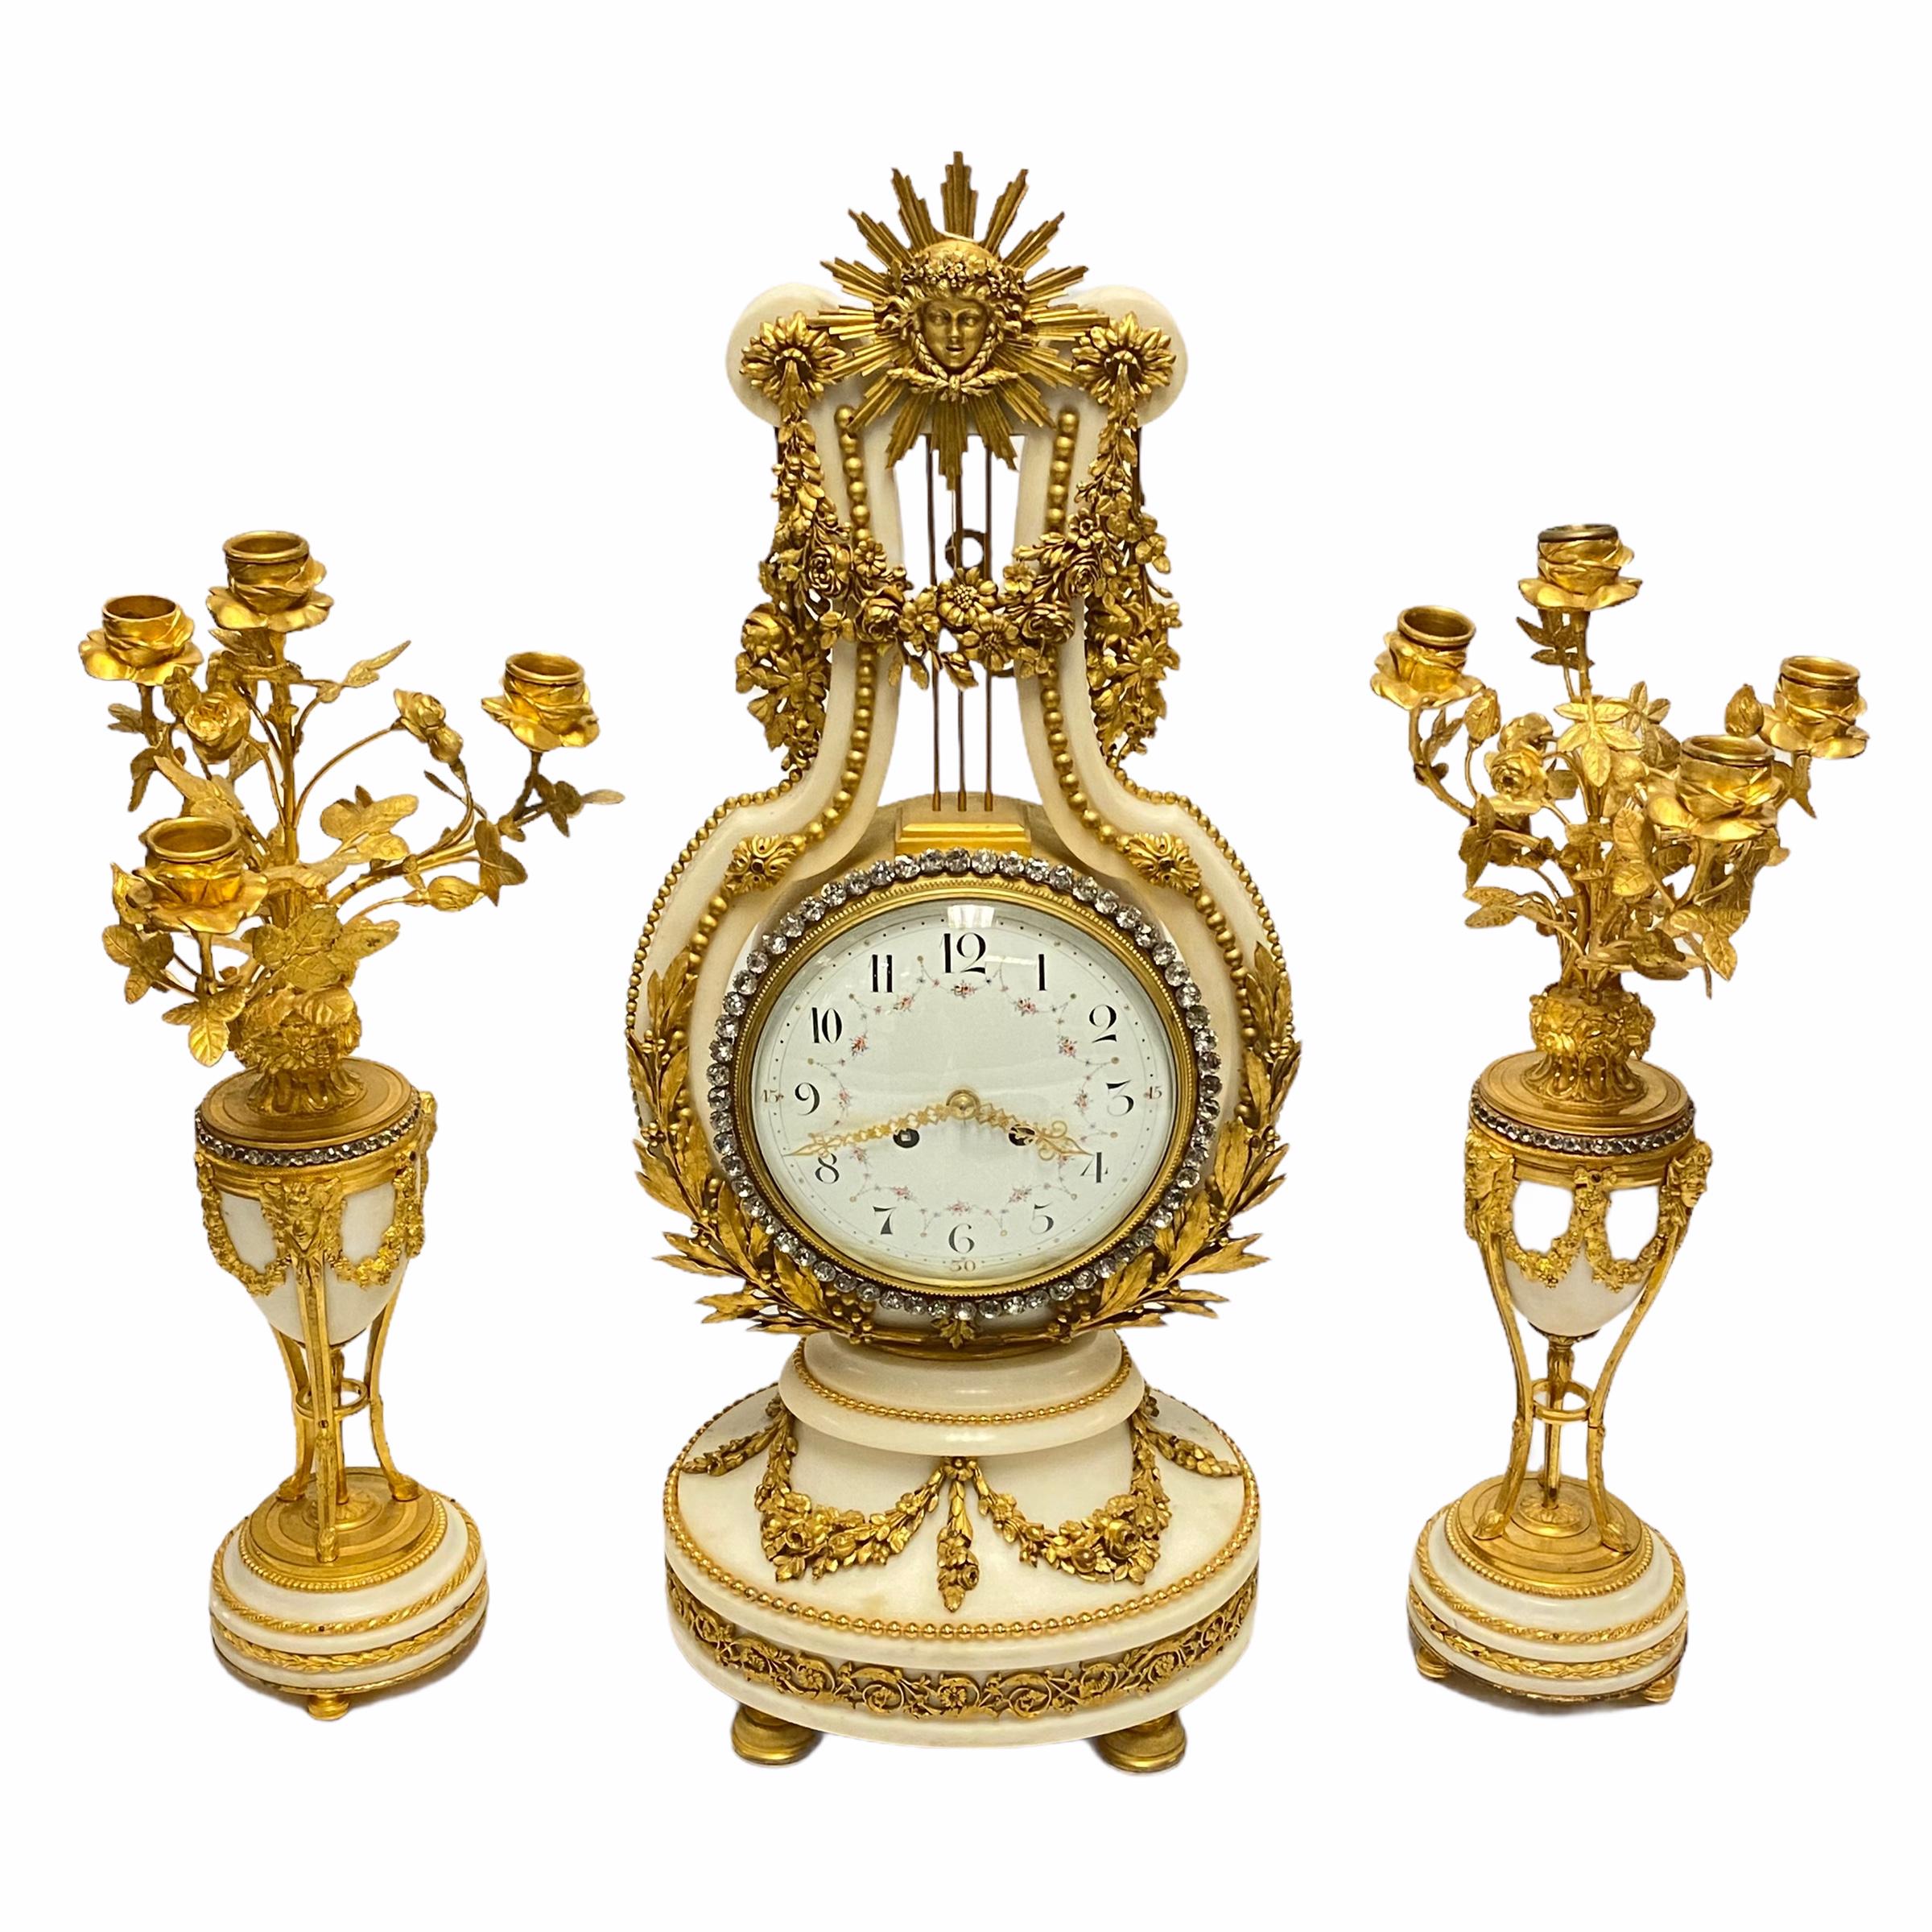 A very fine quality French 19th century clock and garniture suite. Comprising an ormolu-mounted white marble mantel clock and a pair of gilt bronze and white marble candelabras. Clock is decorated with simulated glass diamonds, movement is stamped